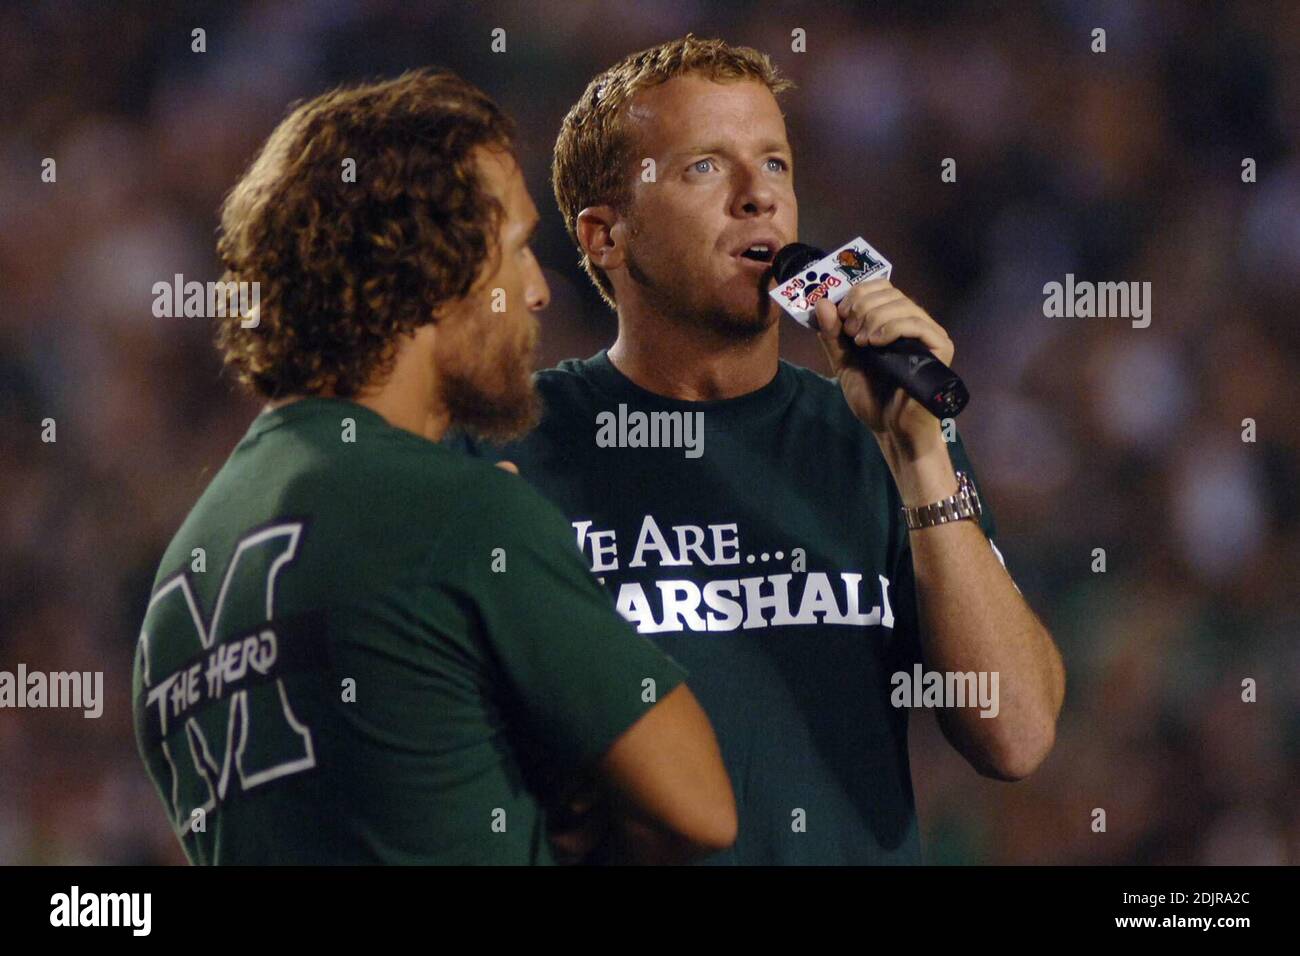 We Are Marshall film director McG addresses the Marshall Thundering Herd home crowd alongside star Matthew McConaughey prior to showing a small clip from the upcoming Warner Brothers film Wednesday, 10/4/06 at halftime of the Marshall University game against Central Florida at Joan C. Edwards Stadium in Huntington, West Virginia. Stock Photo